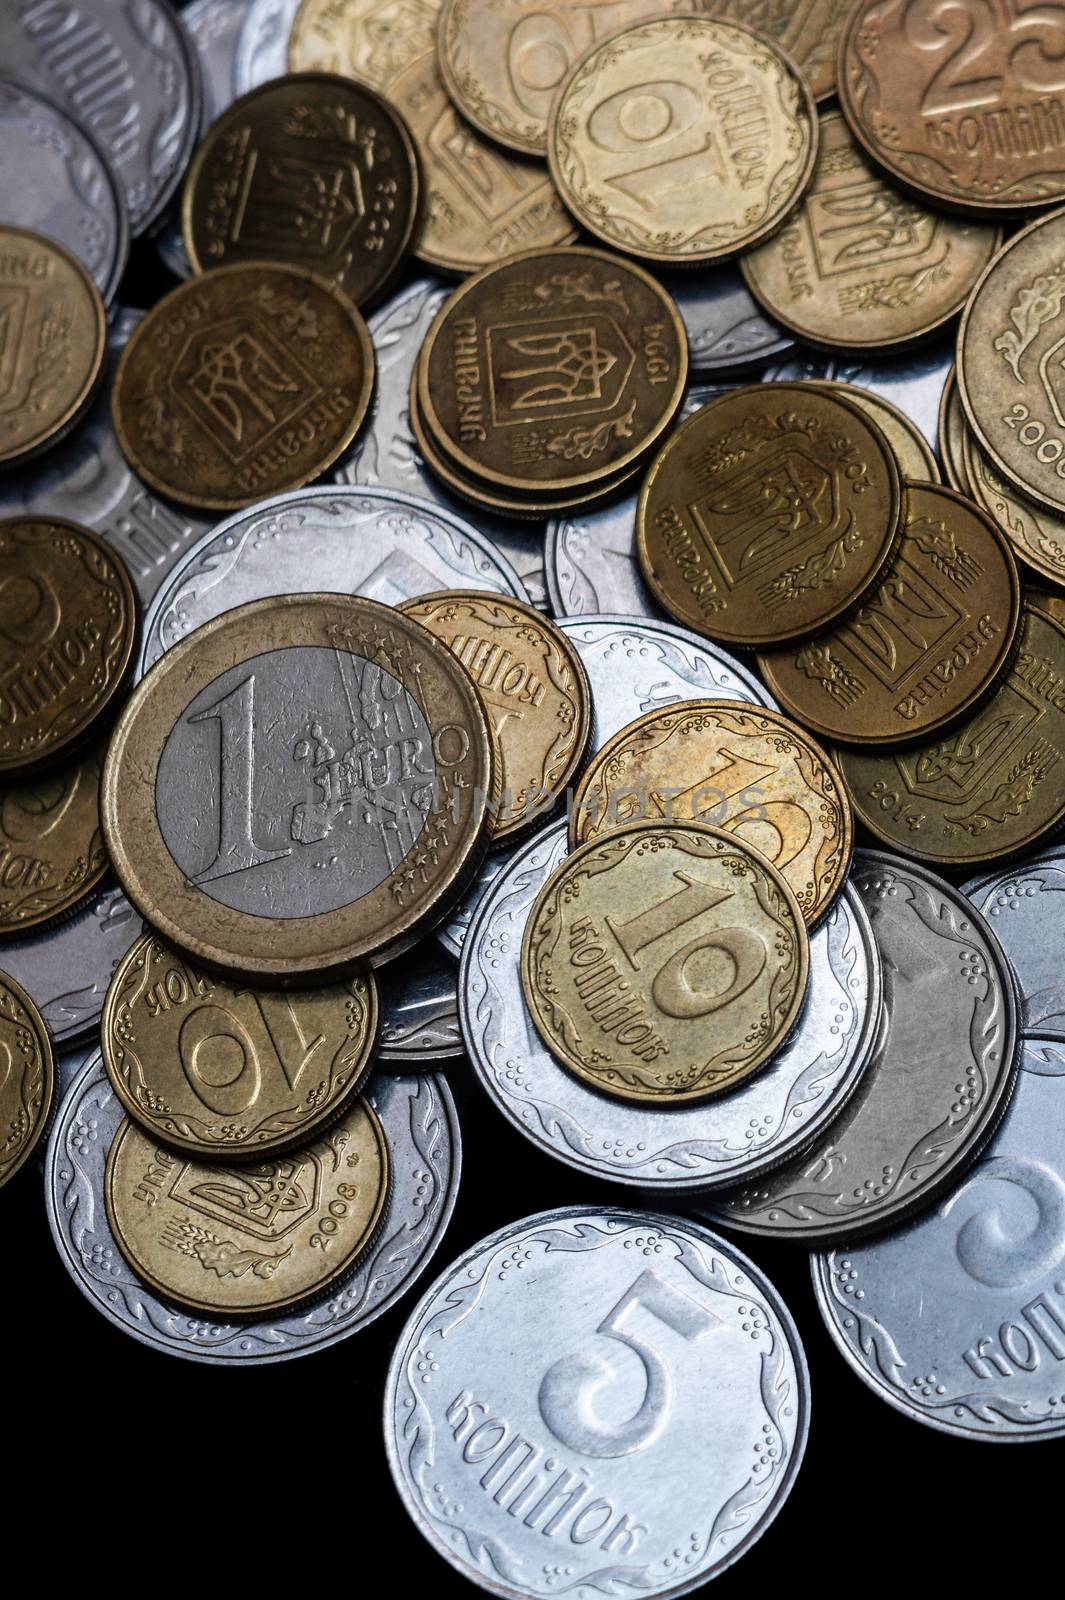 Ukrainian coins with one euro coin isolated on black background. Close-up view. Coins are located at the upper side of frame. A conceptual image.